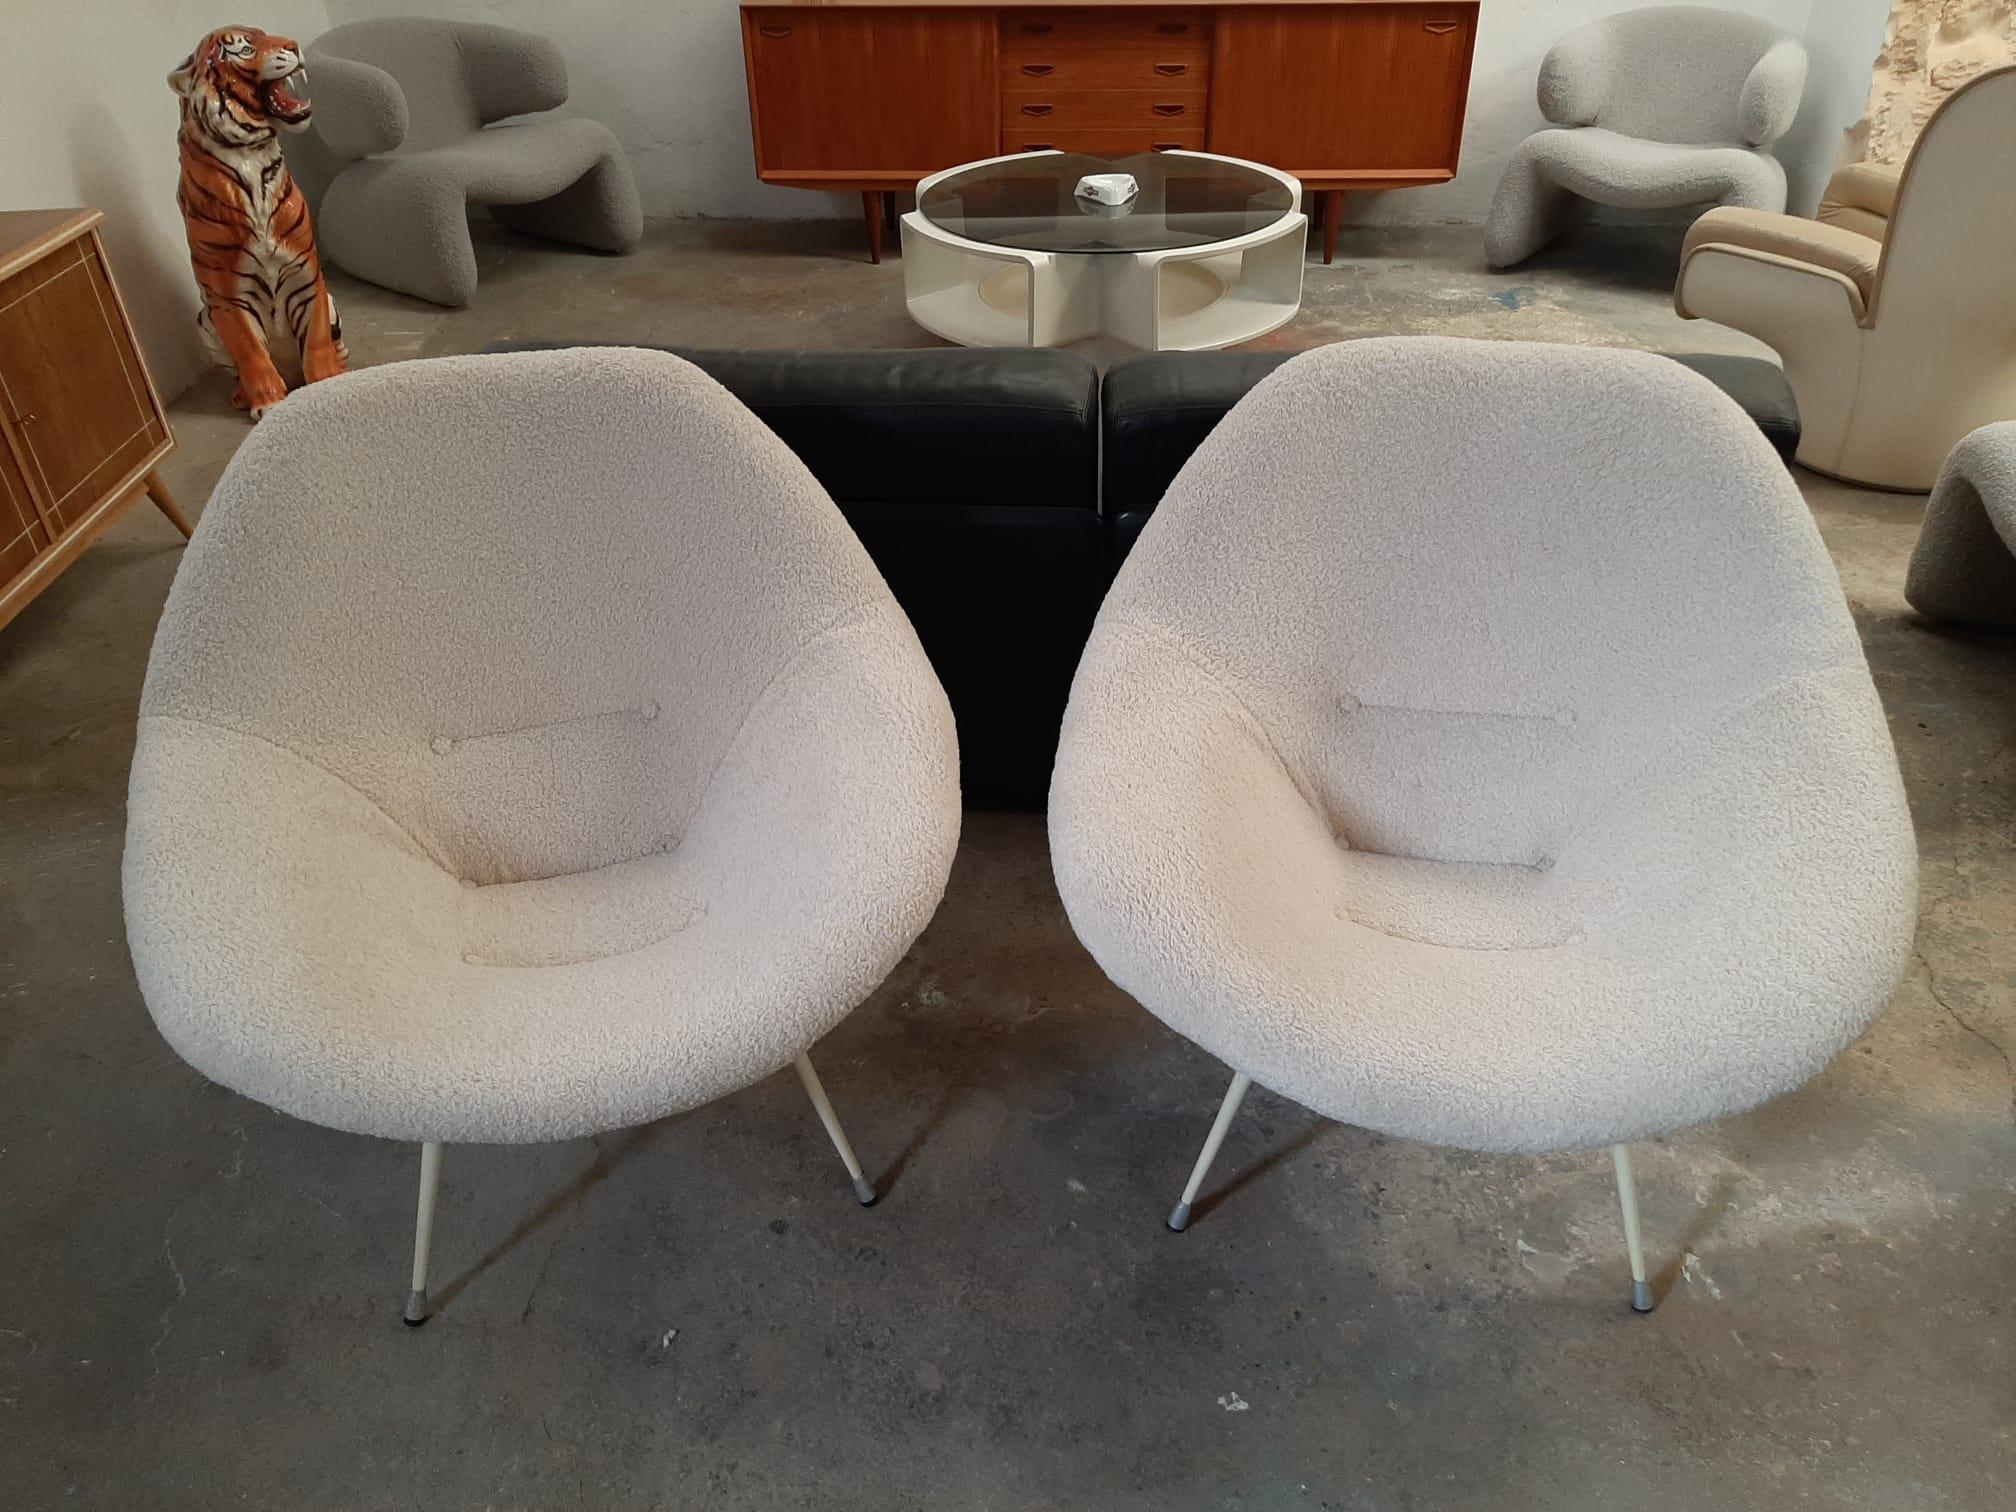 A pair of very unique midcentury armchairs from the 1950s Spanish design, possibly from the Hermanos Vidal S.A. or also known as VVV, they were the Spanish leaders in the manufacture of avant-garde furniture of the era. 

This gorgeous set was